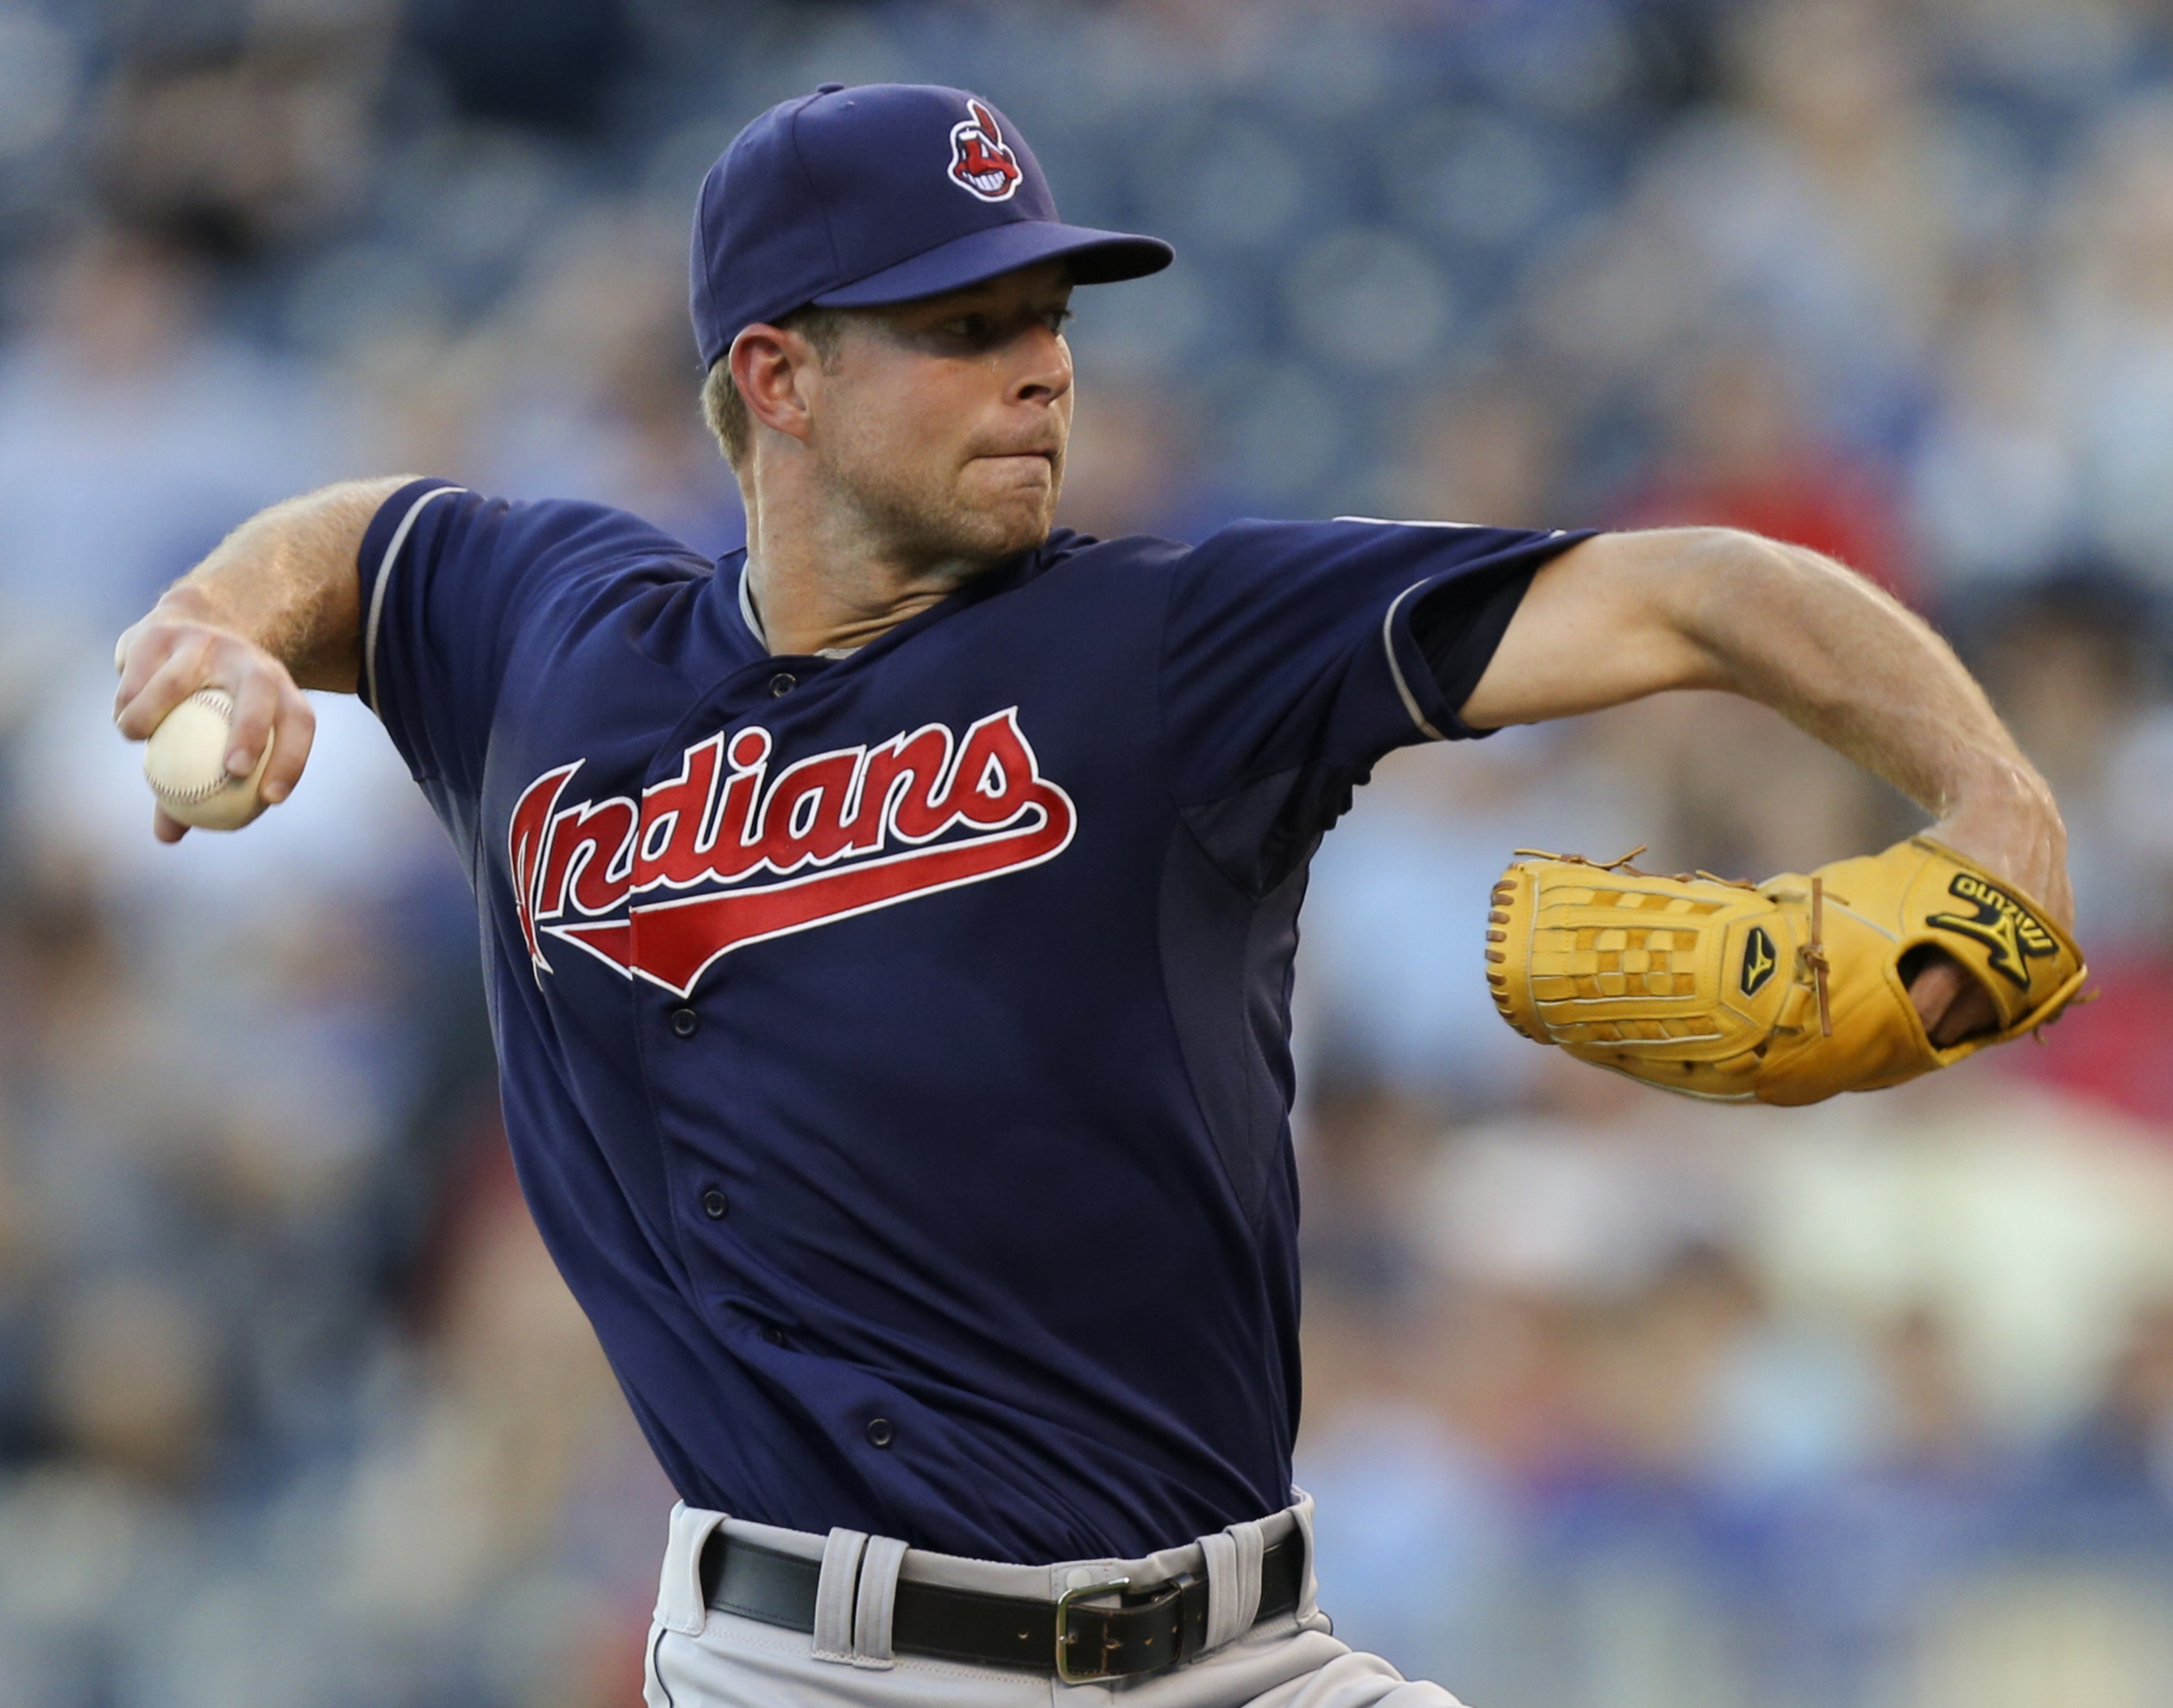 KANSAS CITY, MO - AUGUST 02:  Corey Kluber #28 of the Cleveland Indians pitches against the Kansas City Royals in the first inning at Kauffman Stadium on August 2, 2012 in Kansas City, Missouri. (Photo by Ed Zurga/Getty Images)